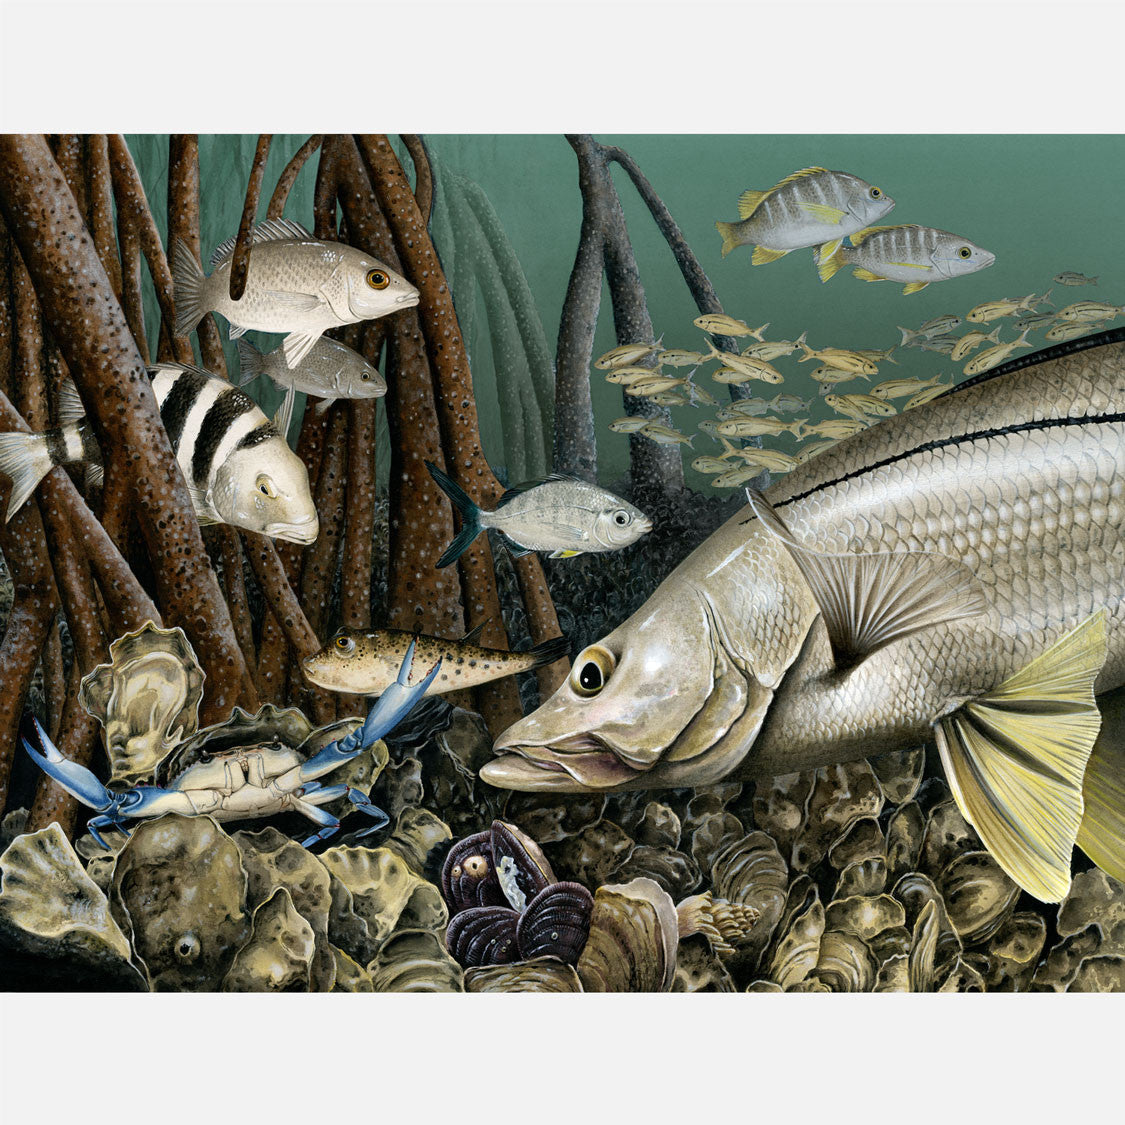 This beautiful, highly detailed and accurate illustration of an oyster reef from a predator's view. The art features a snook and several other Florida fish species.